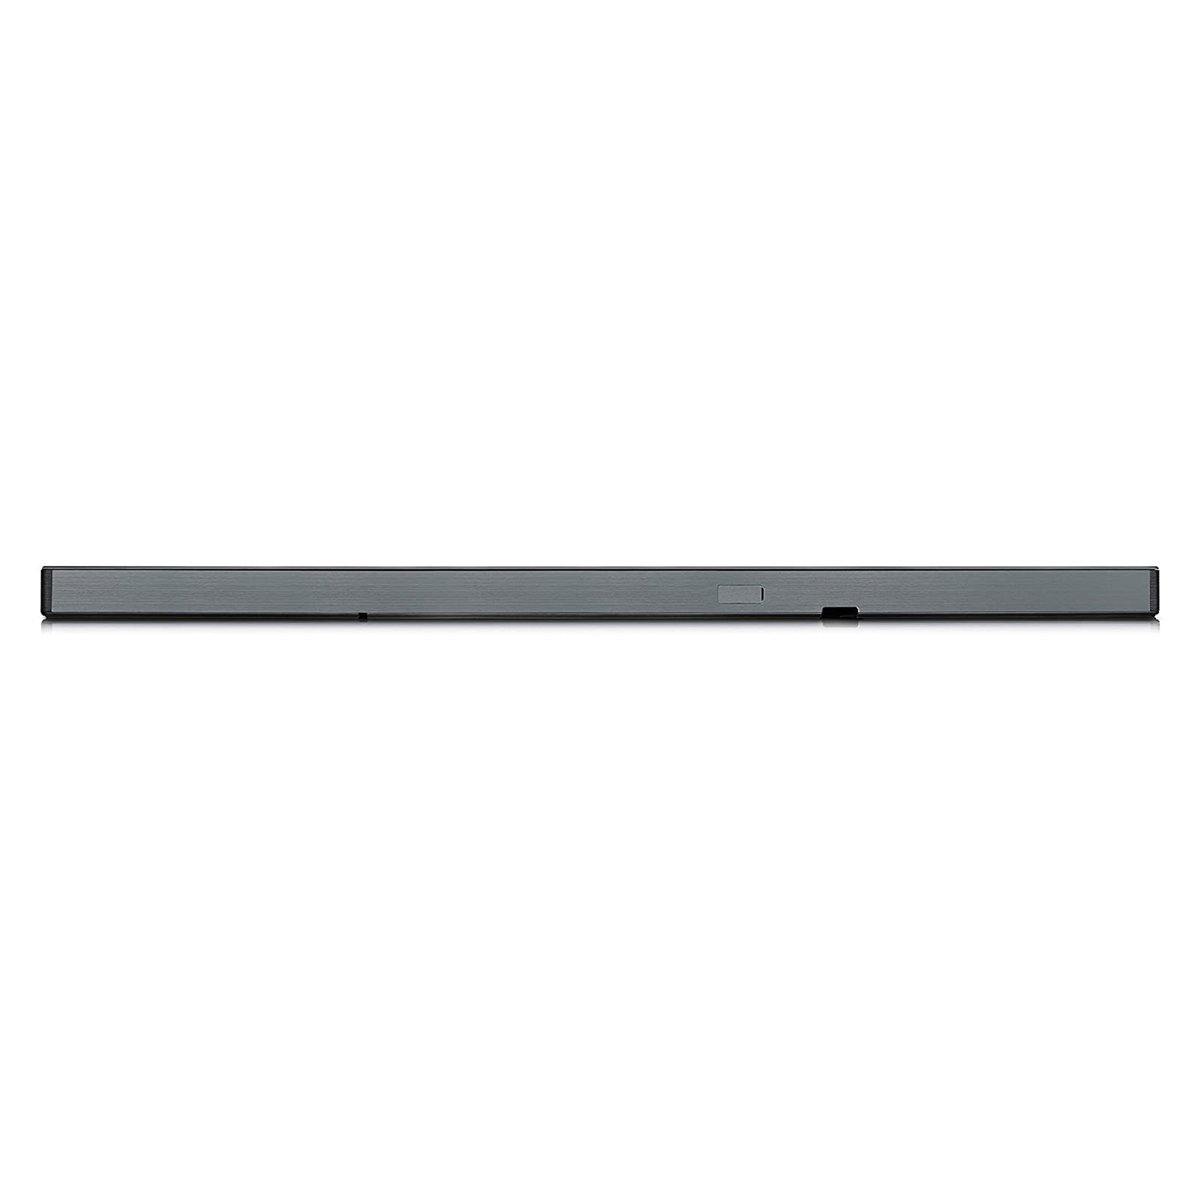 LG SL9YG 4.1.2 Channel High Res Audio Sound Bar w/ Meridian Technology, Dolby Atmos and Google Assistant Built-In, Black